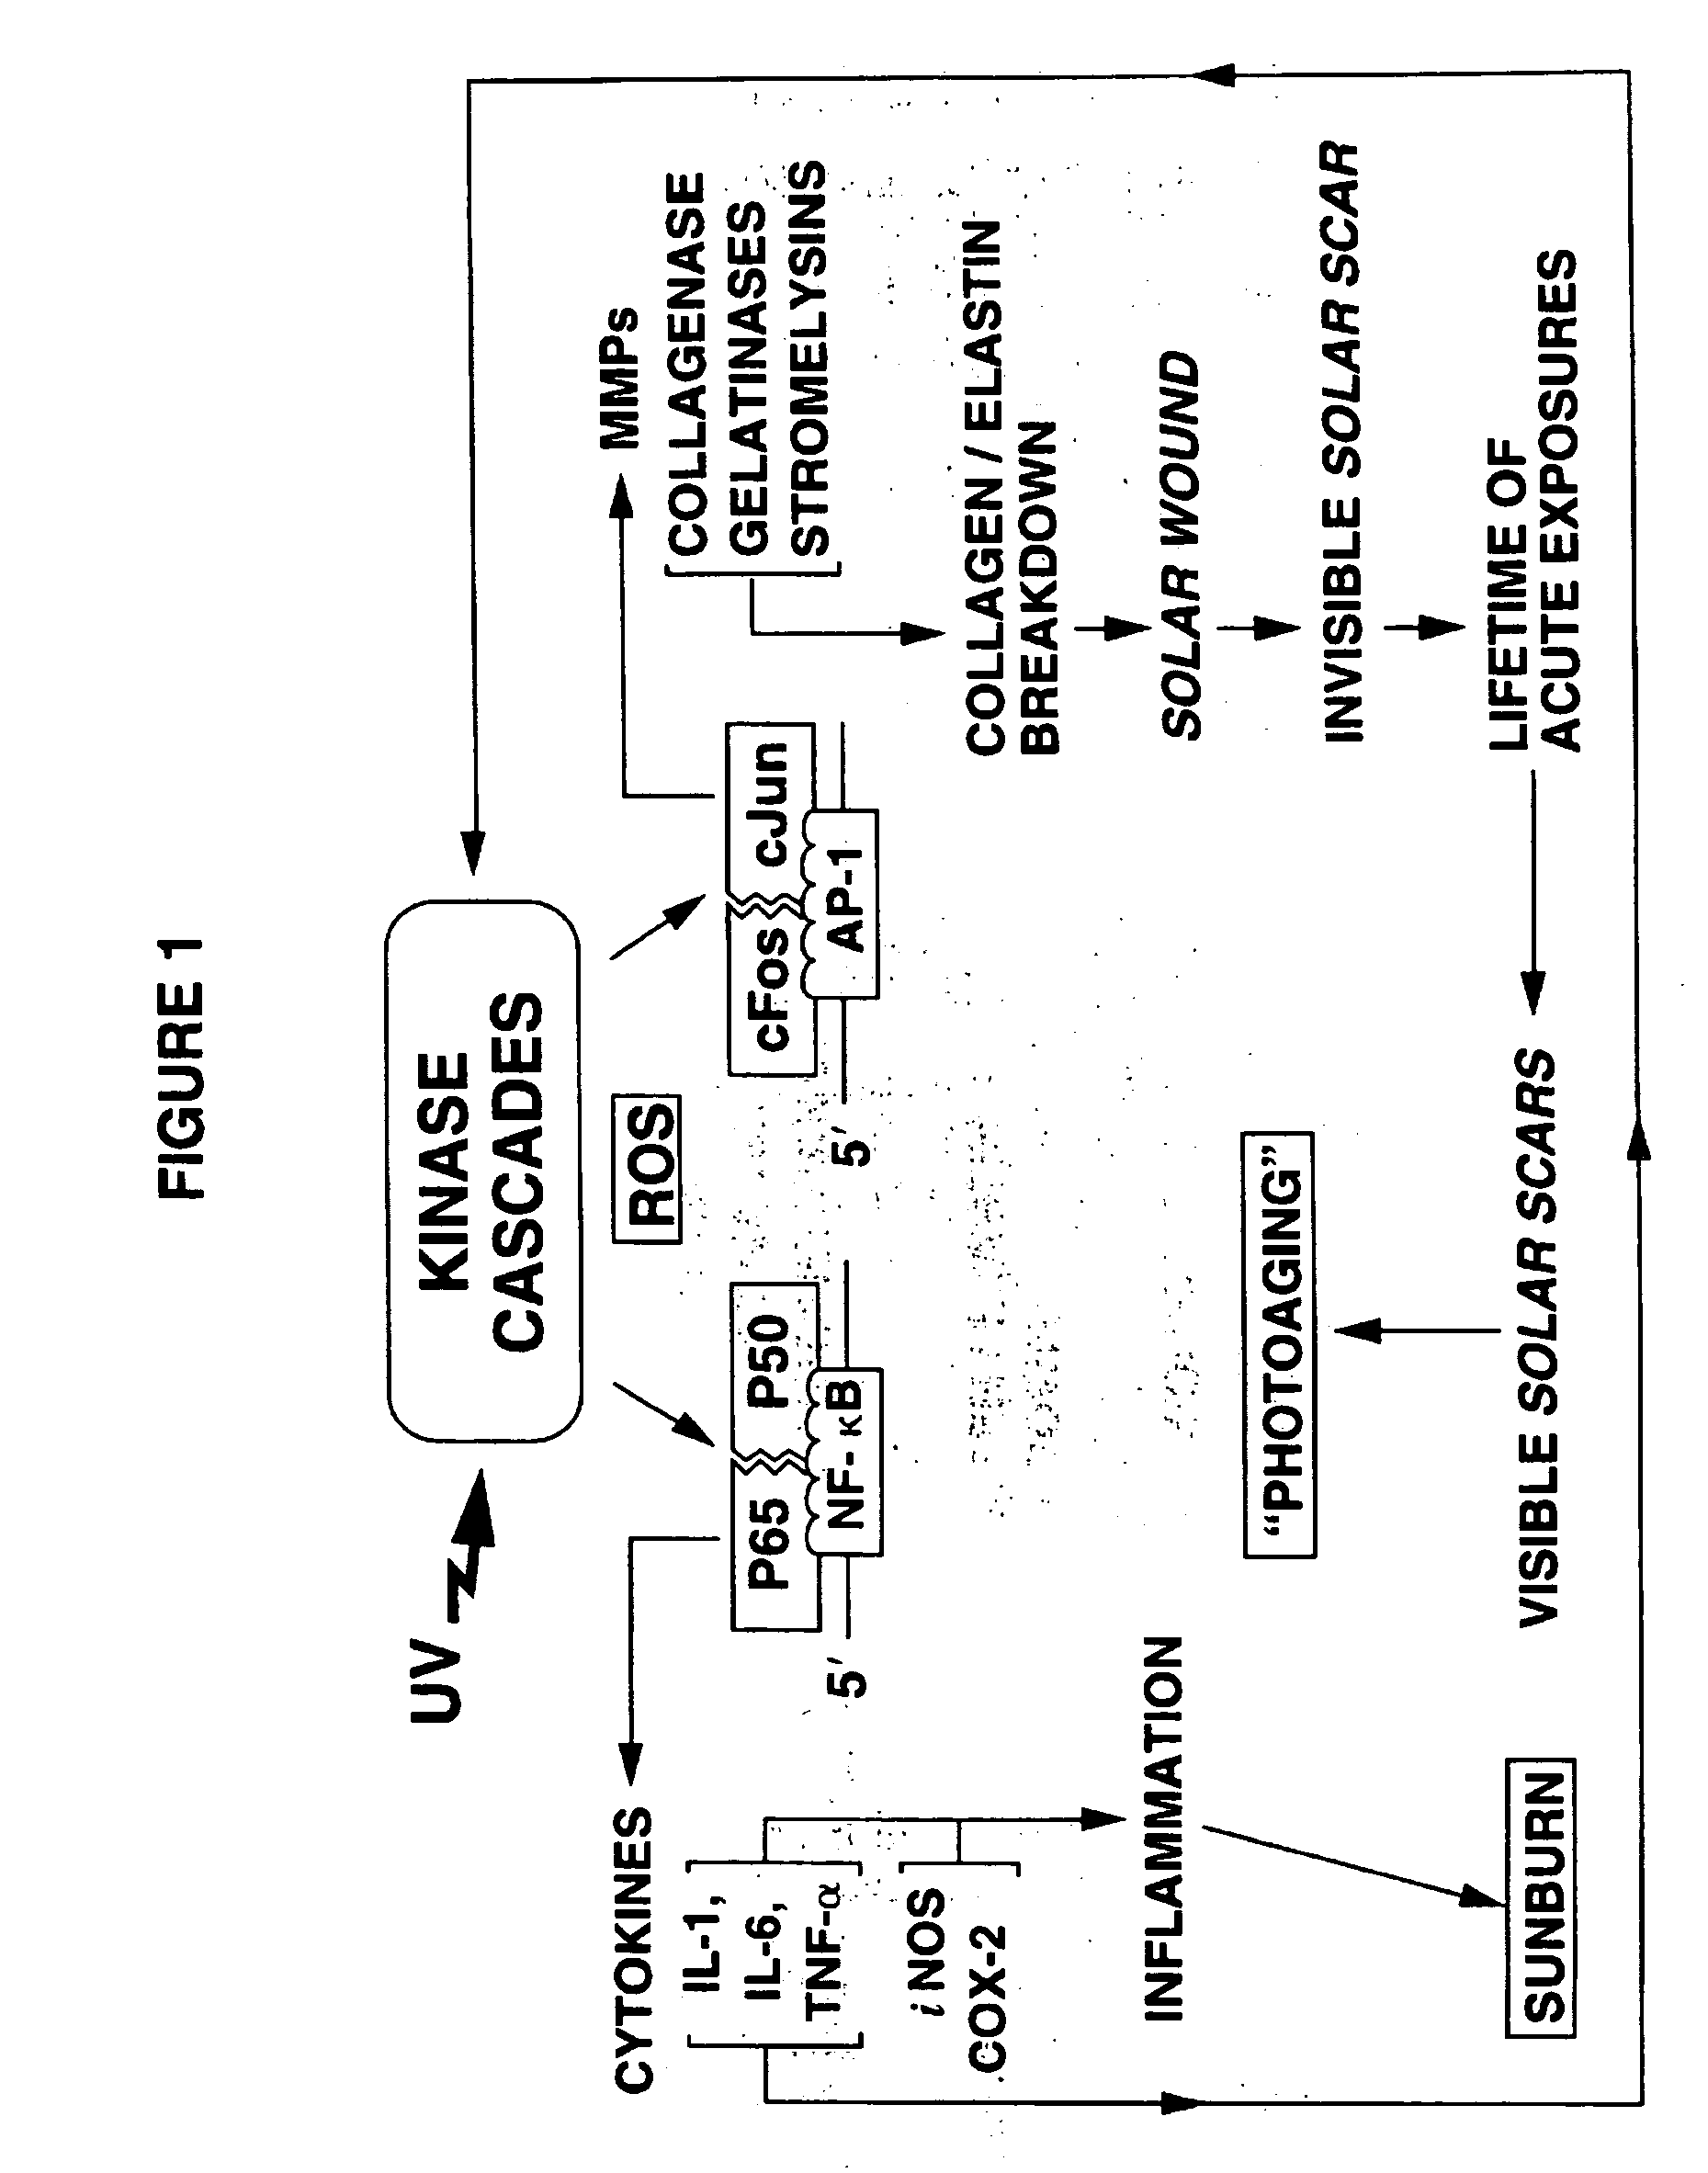 Methods for inhibiting photoaging of human skin using orally-administered agent